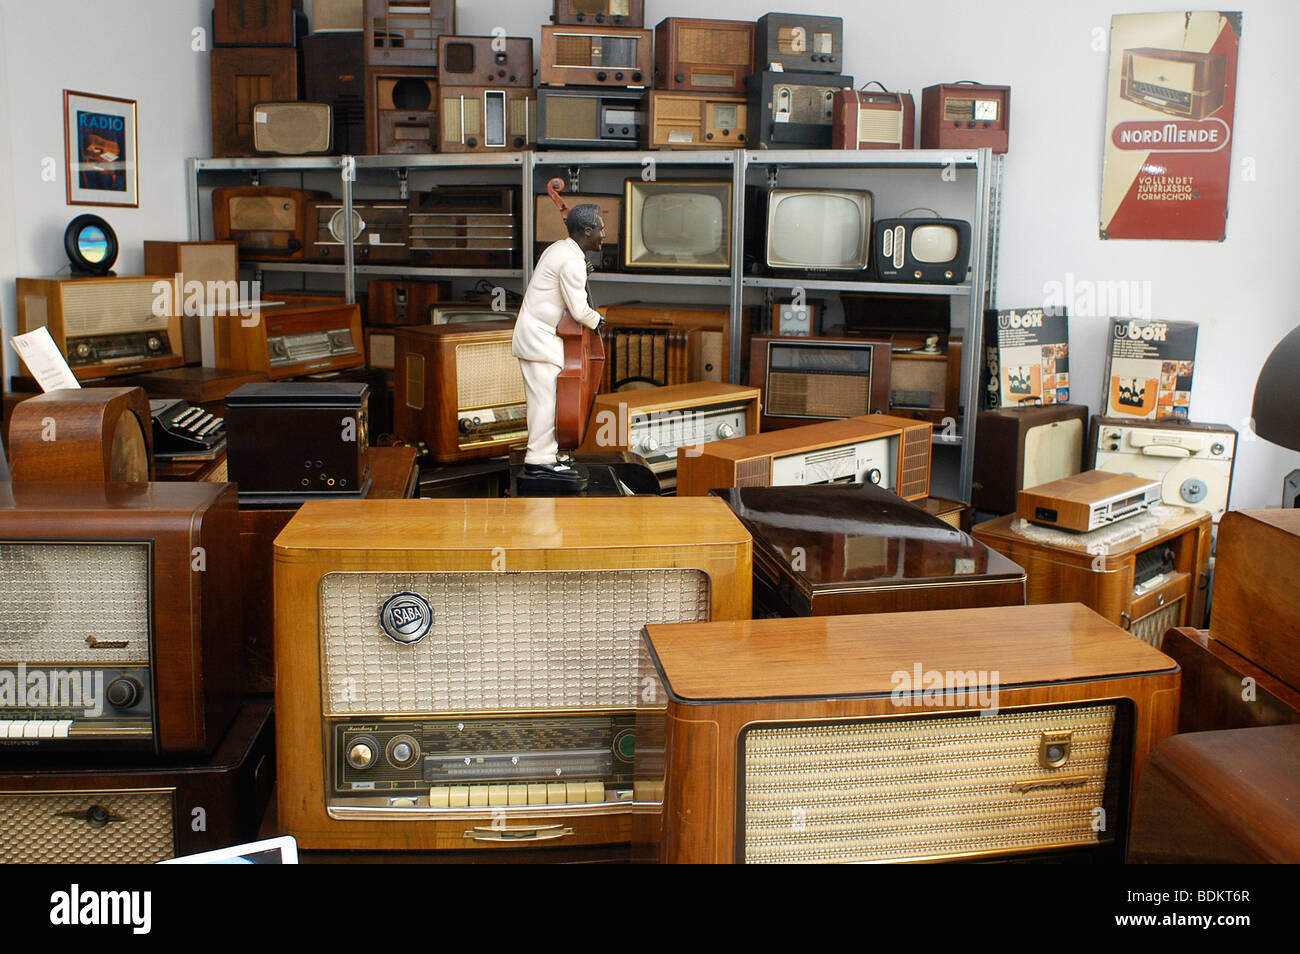 Radio Shop High Resolution Stock Photography and Images - Alamy